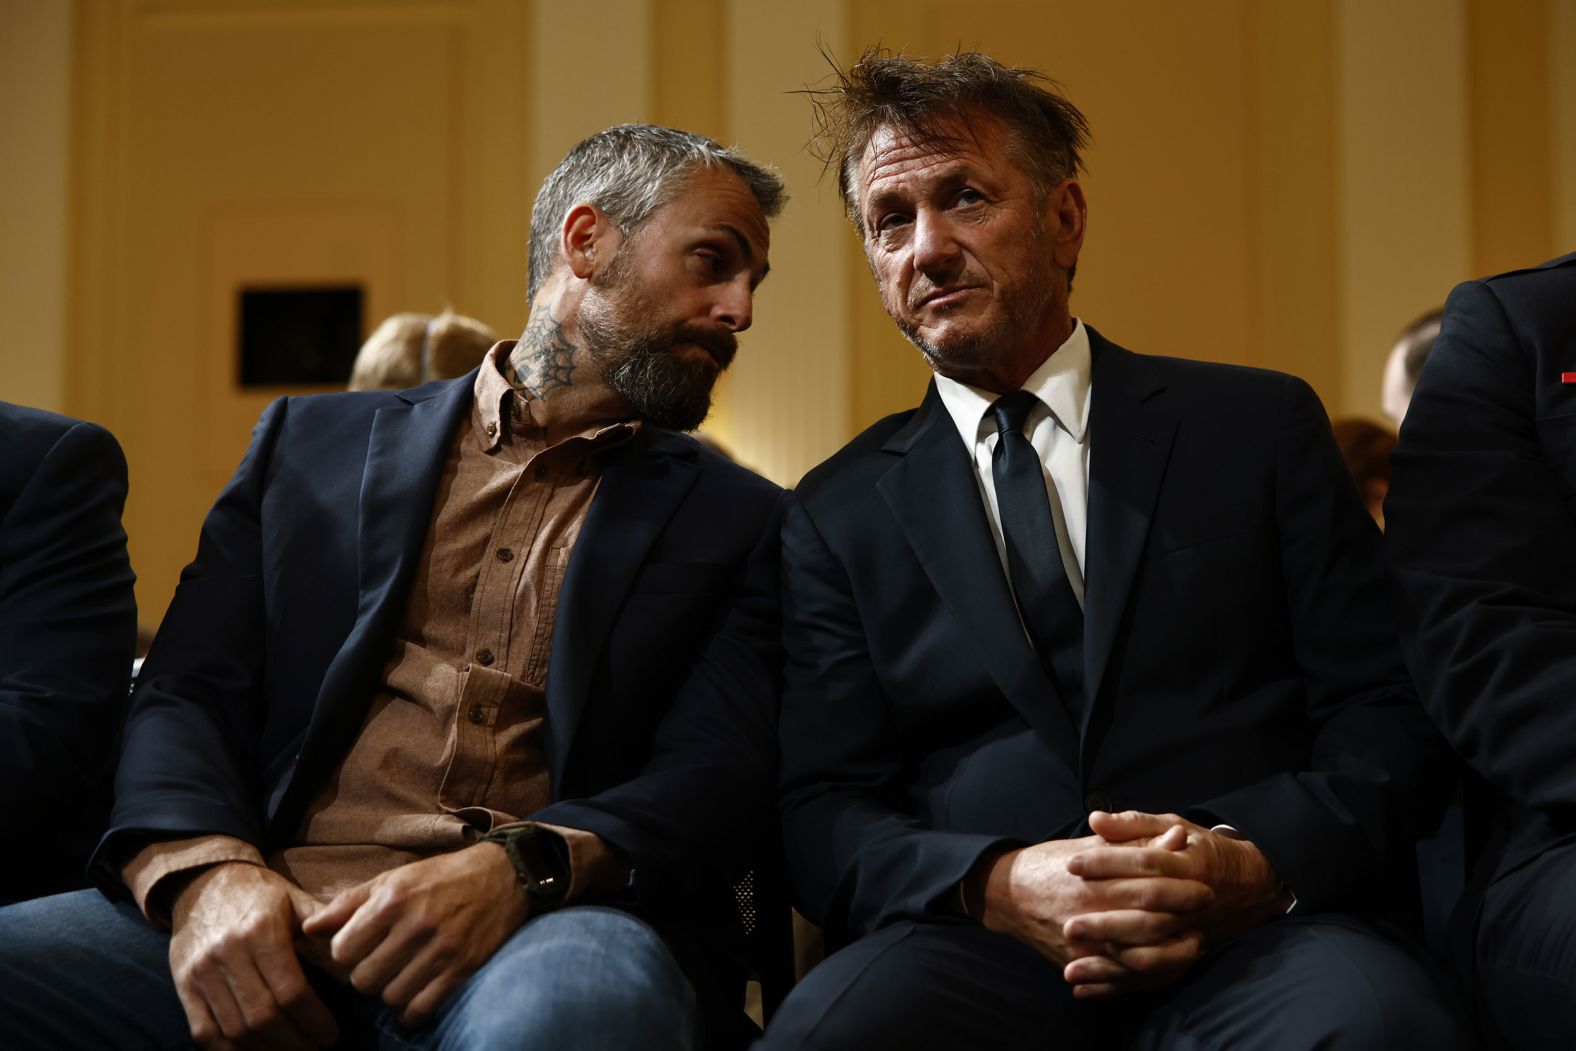 From left, former Metropolitan Police Department officer Michael Fanone and actor Sean Penn attend the hearing on June 23. Penn, who has been following the committee hearings, <a href="index.php?page=&url=https%3A%2F%2Fwww.cnn.com%2Fpolitics%2Flive-news%2Fjanuary-6-hearings-june-23%2Fh_dec8802a6813073e147d87cf8f9915ad" target="_blank">told reporters,</a> "I'm just here to observe, just another citizen."